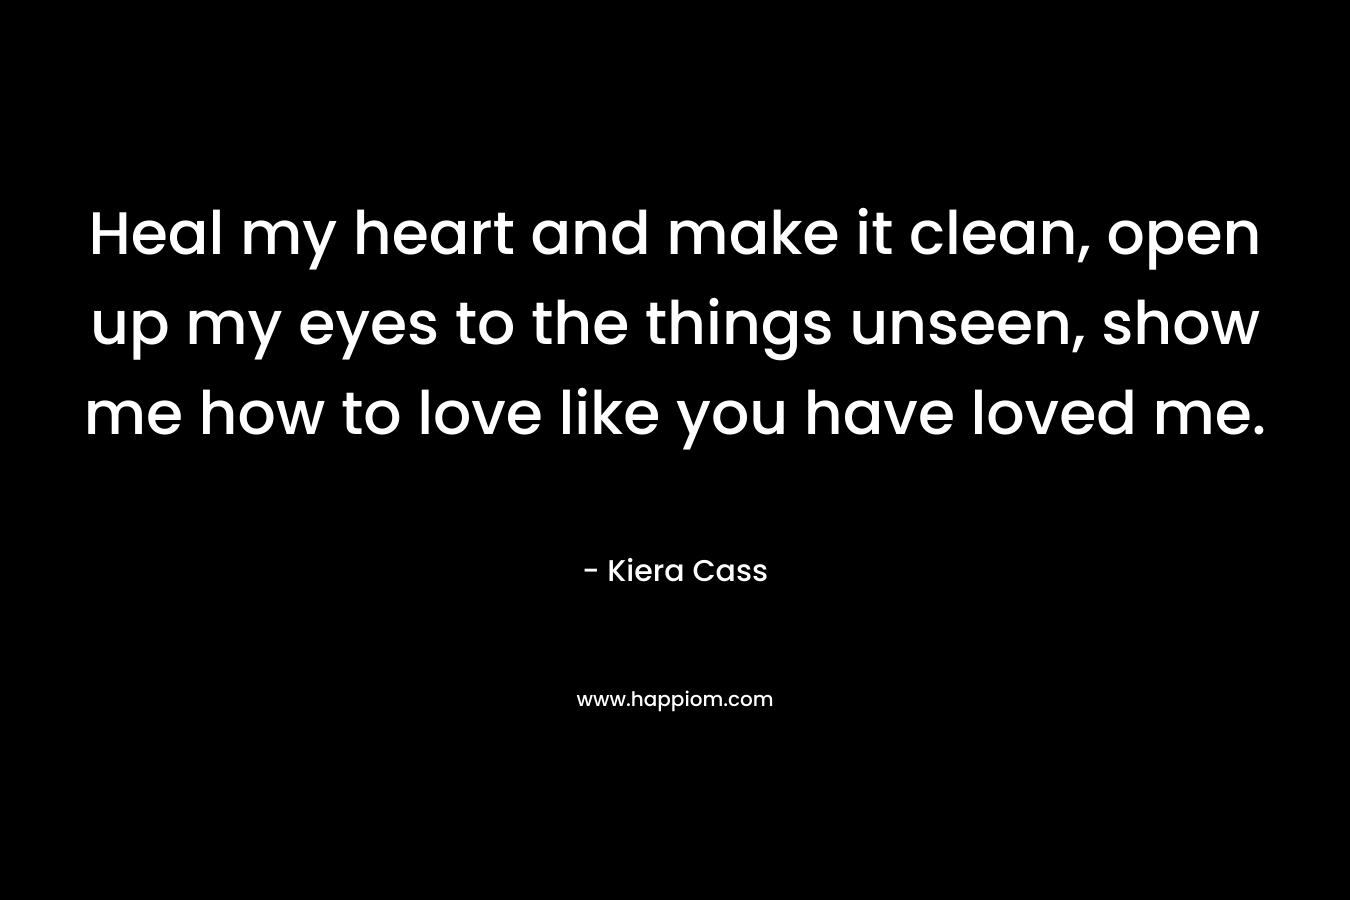 Heal my heart and make it clean, open up my eyes to the things unseen, show me how to love like you have loved me. – Kiera Cass